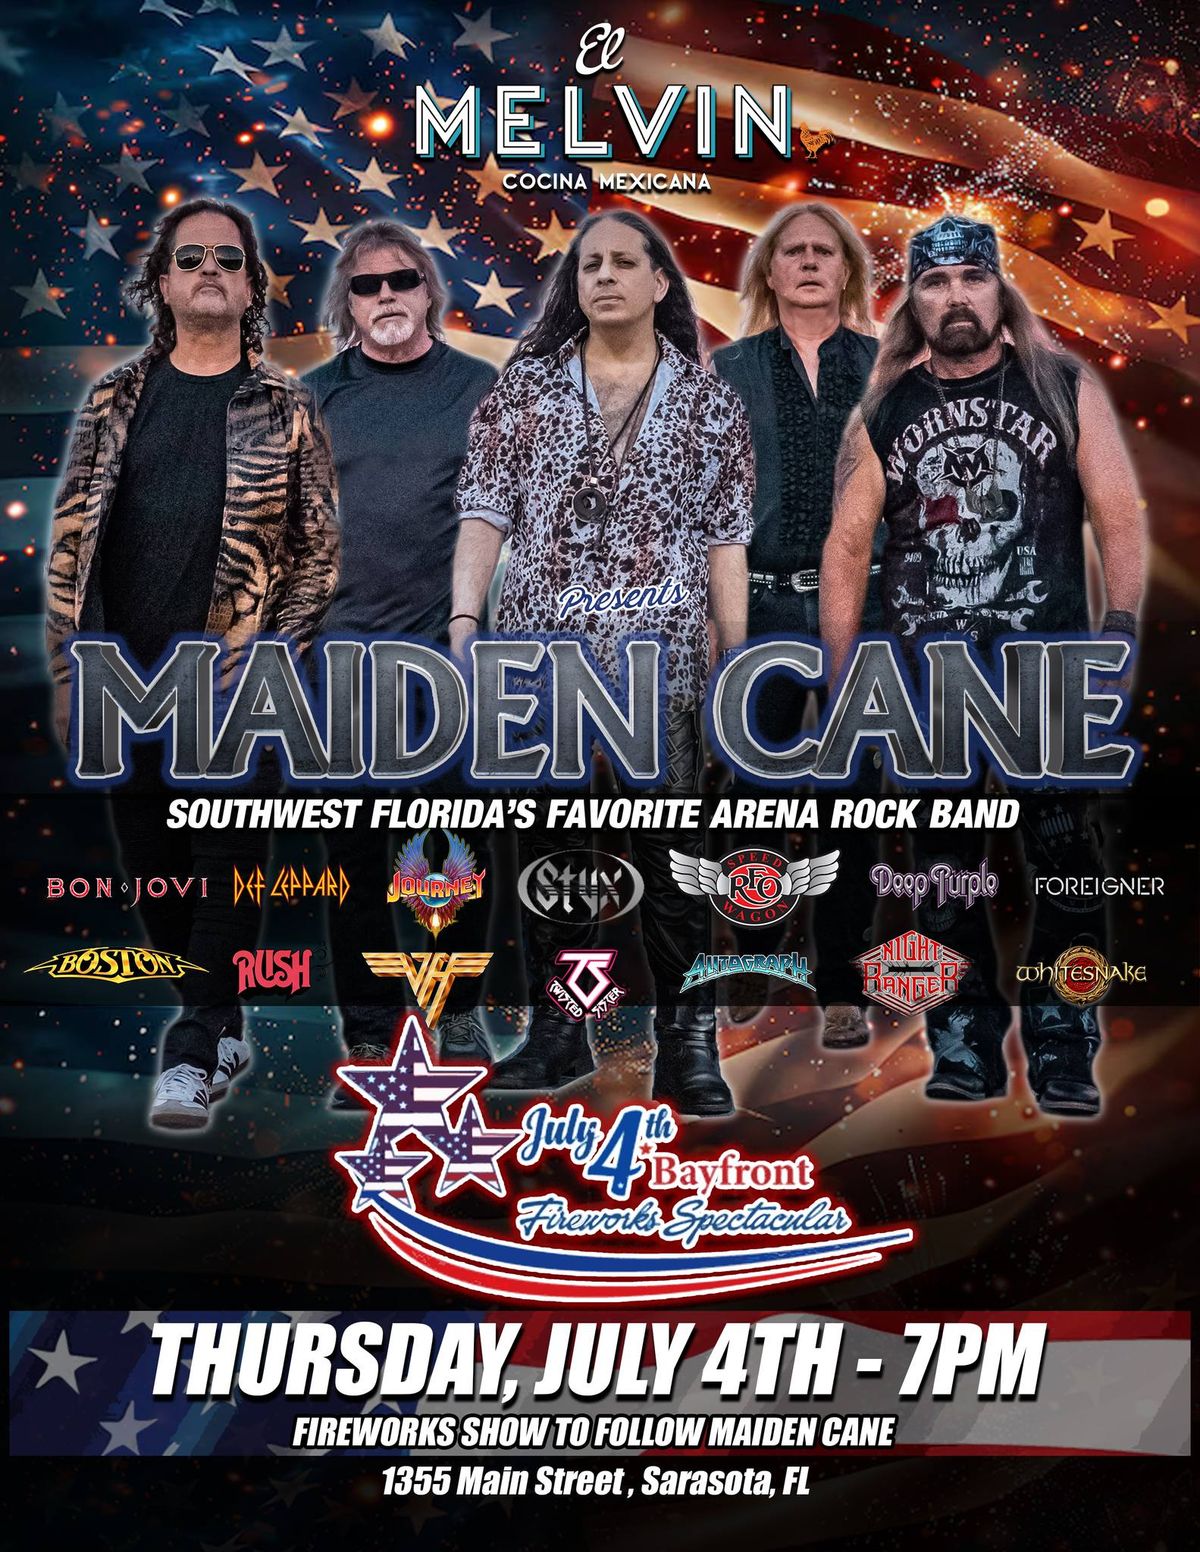 Maiden Cane comes to Sarasota for a 4th of July Block Party